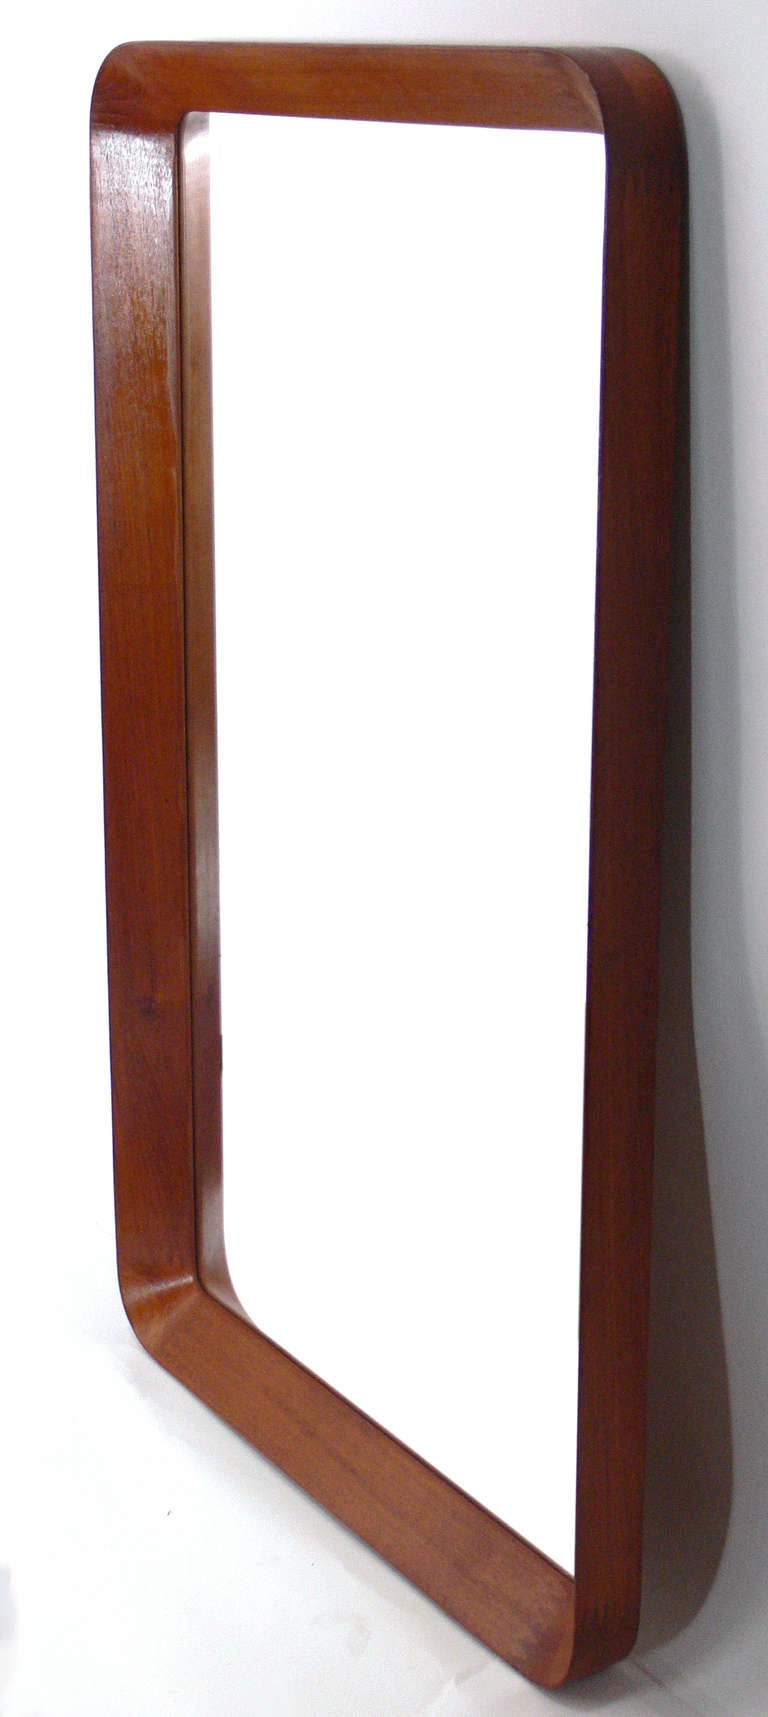 Danish Modern teak wall mirror, designed for the Pedersen & Hansen Company, Denmark, circa 1960's. Simple, clean lined design with an interesting profile and great attention to detail, like the finger joinery at the corners.